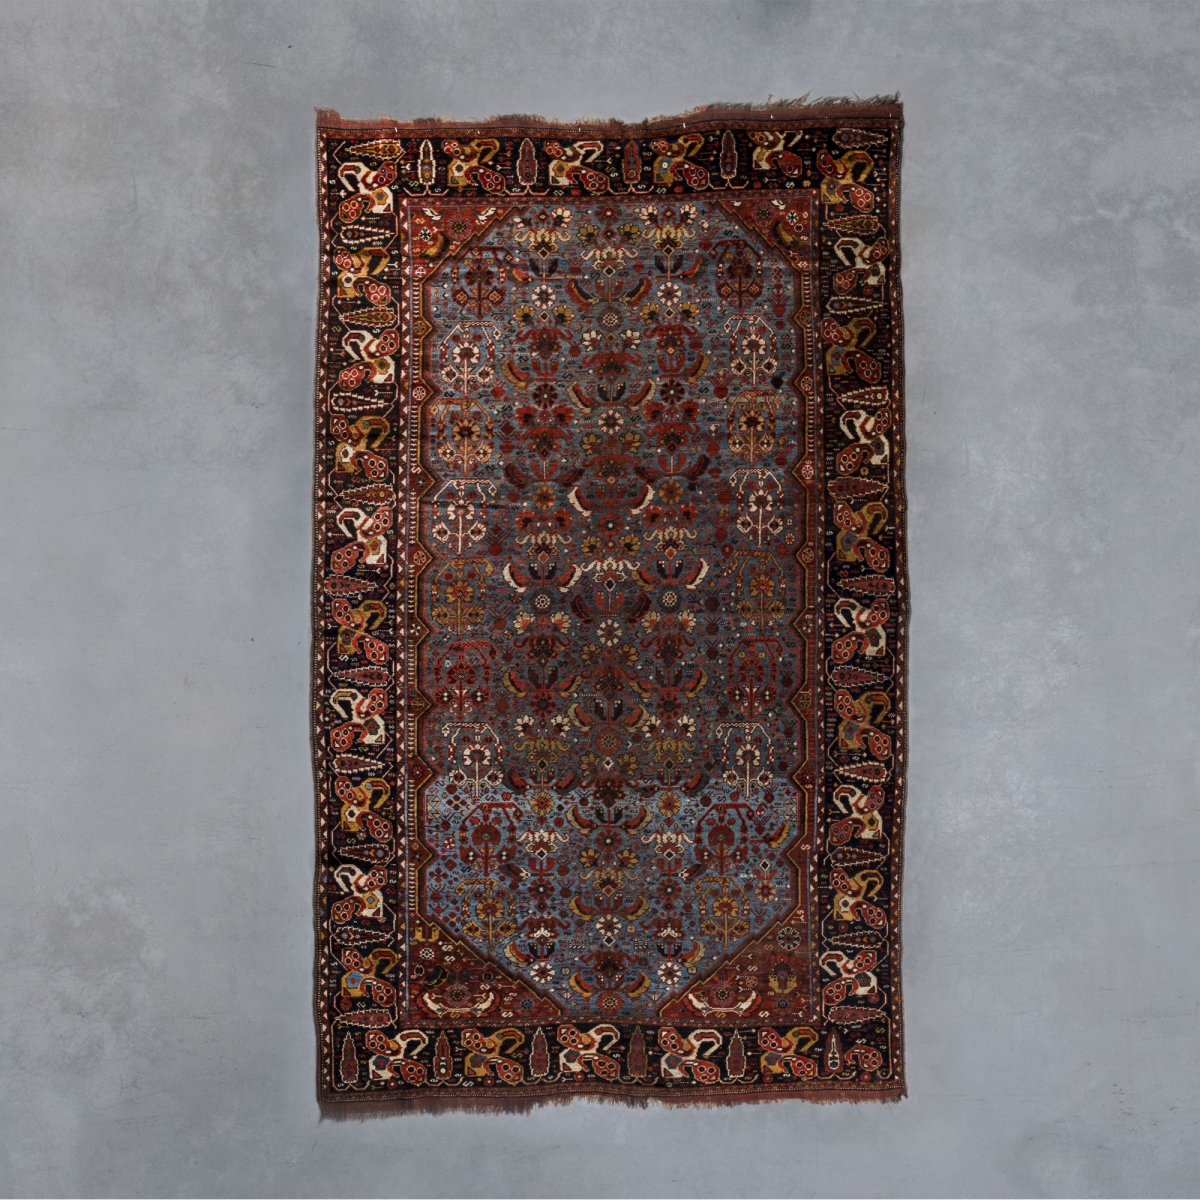 Tappeto Afshar | 271 x 121 cm Antique carpets - Persia  pic-1